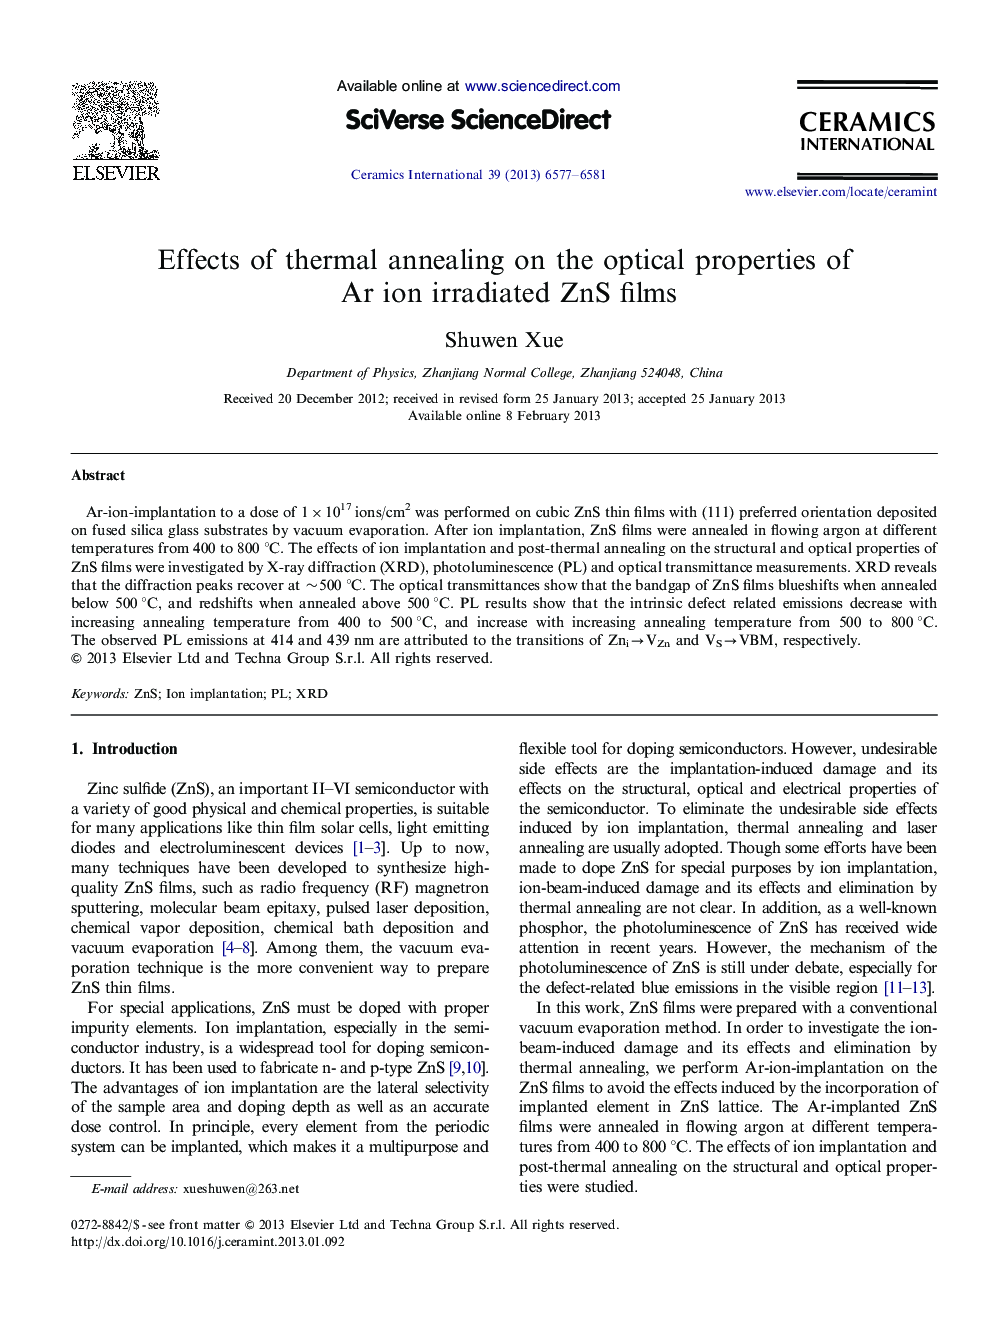 Effects of thermal annealing on the optical properties of Ar ion irradiated ZnS films